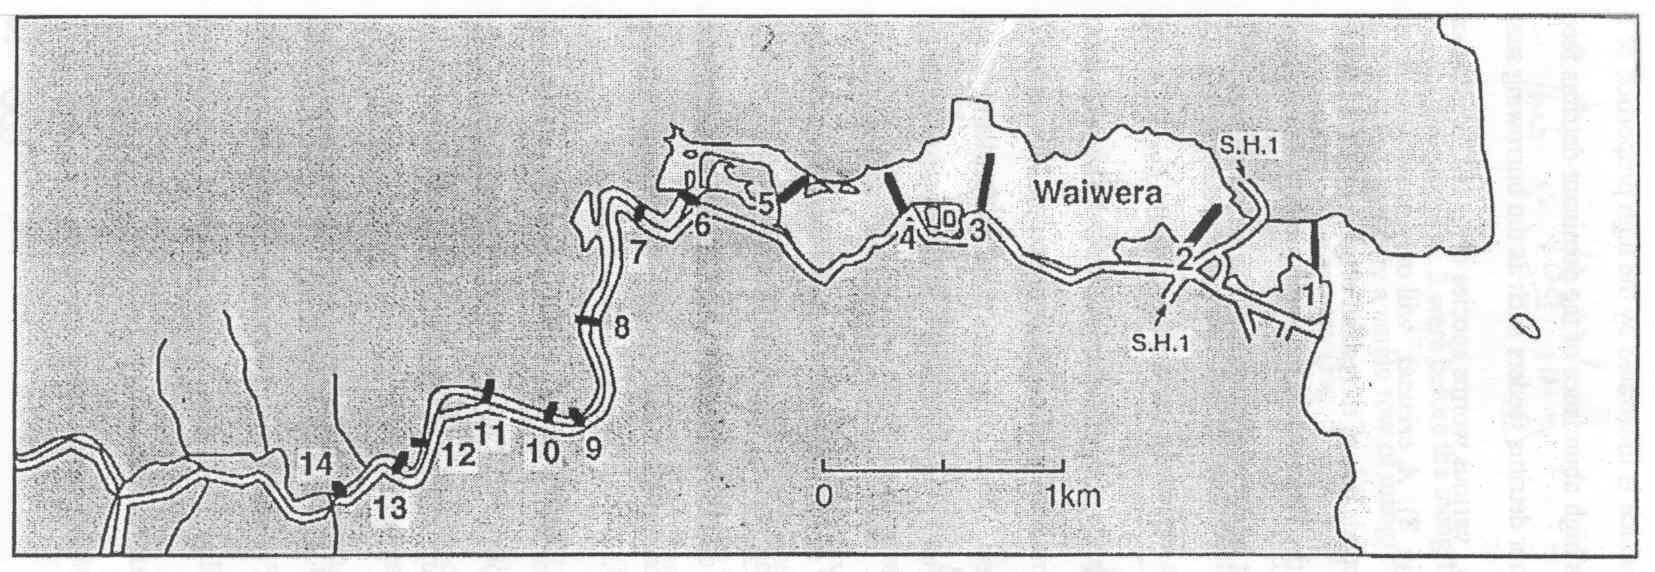 Map of Waiwera estuary showing the sampling areas along the length of the estuary